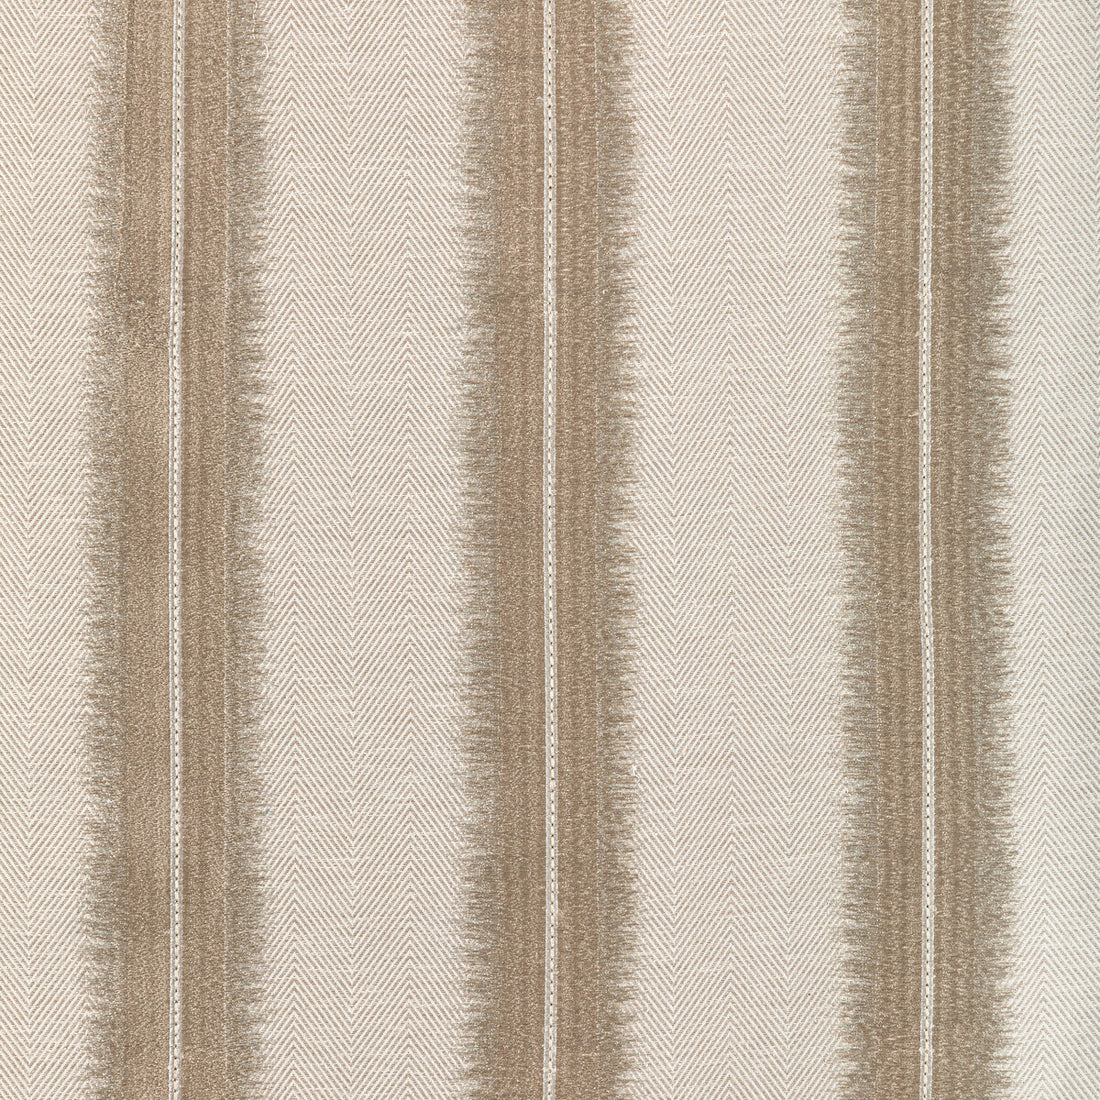 Etched Stripe fabric in champagne color - pattern 36346.16.0 - by Kravet Couture in the Modern Luxe III collection